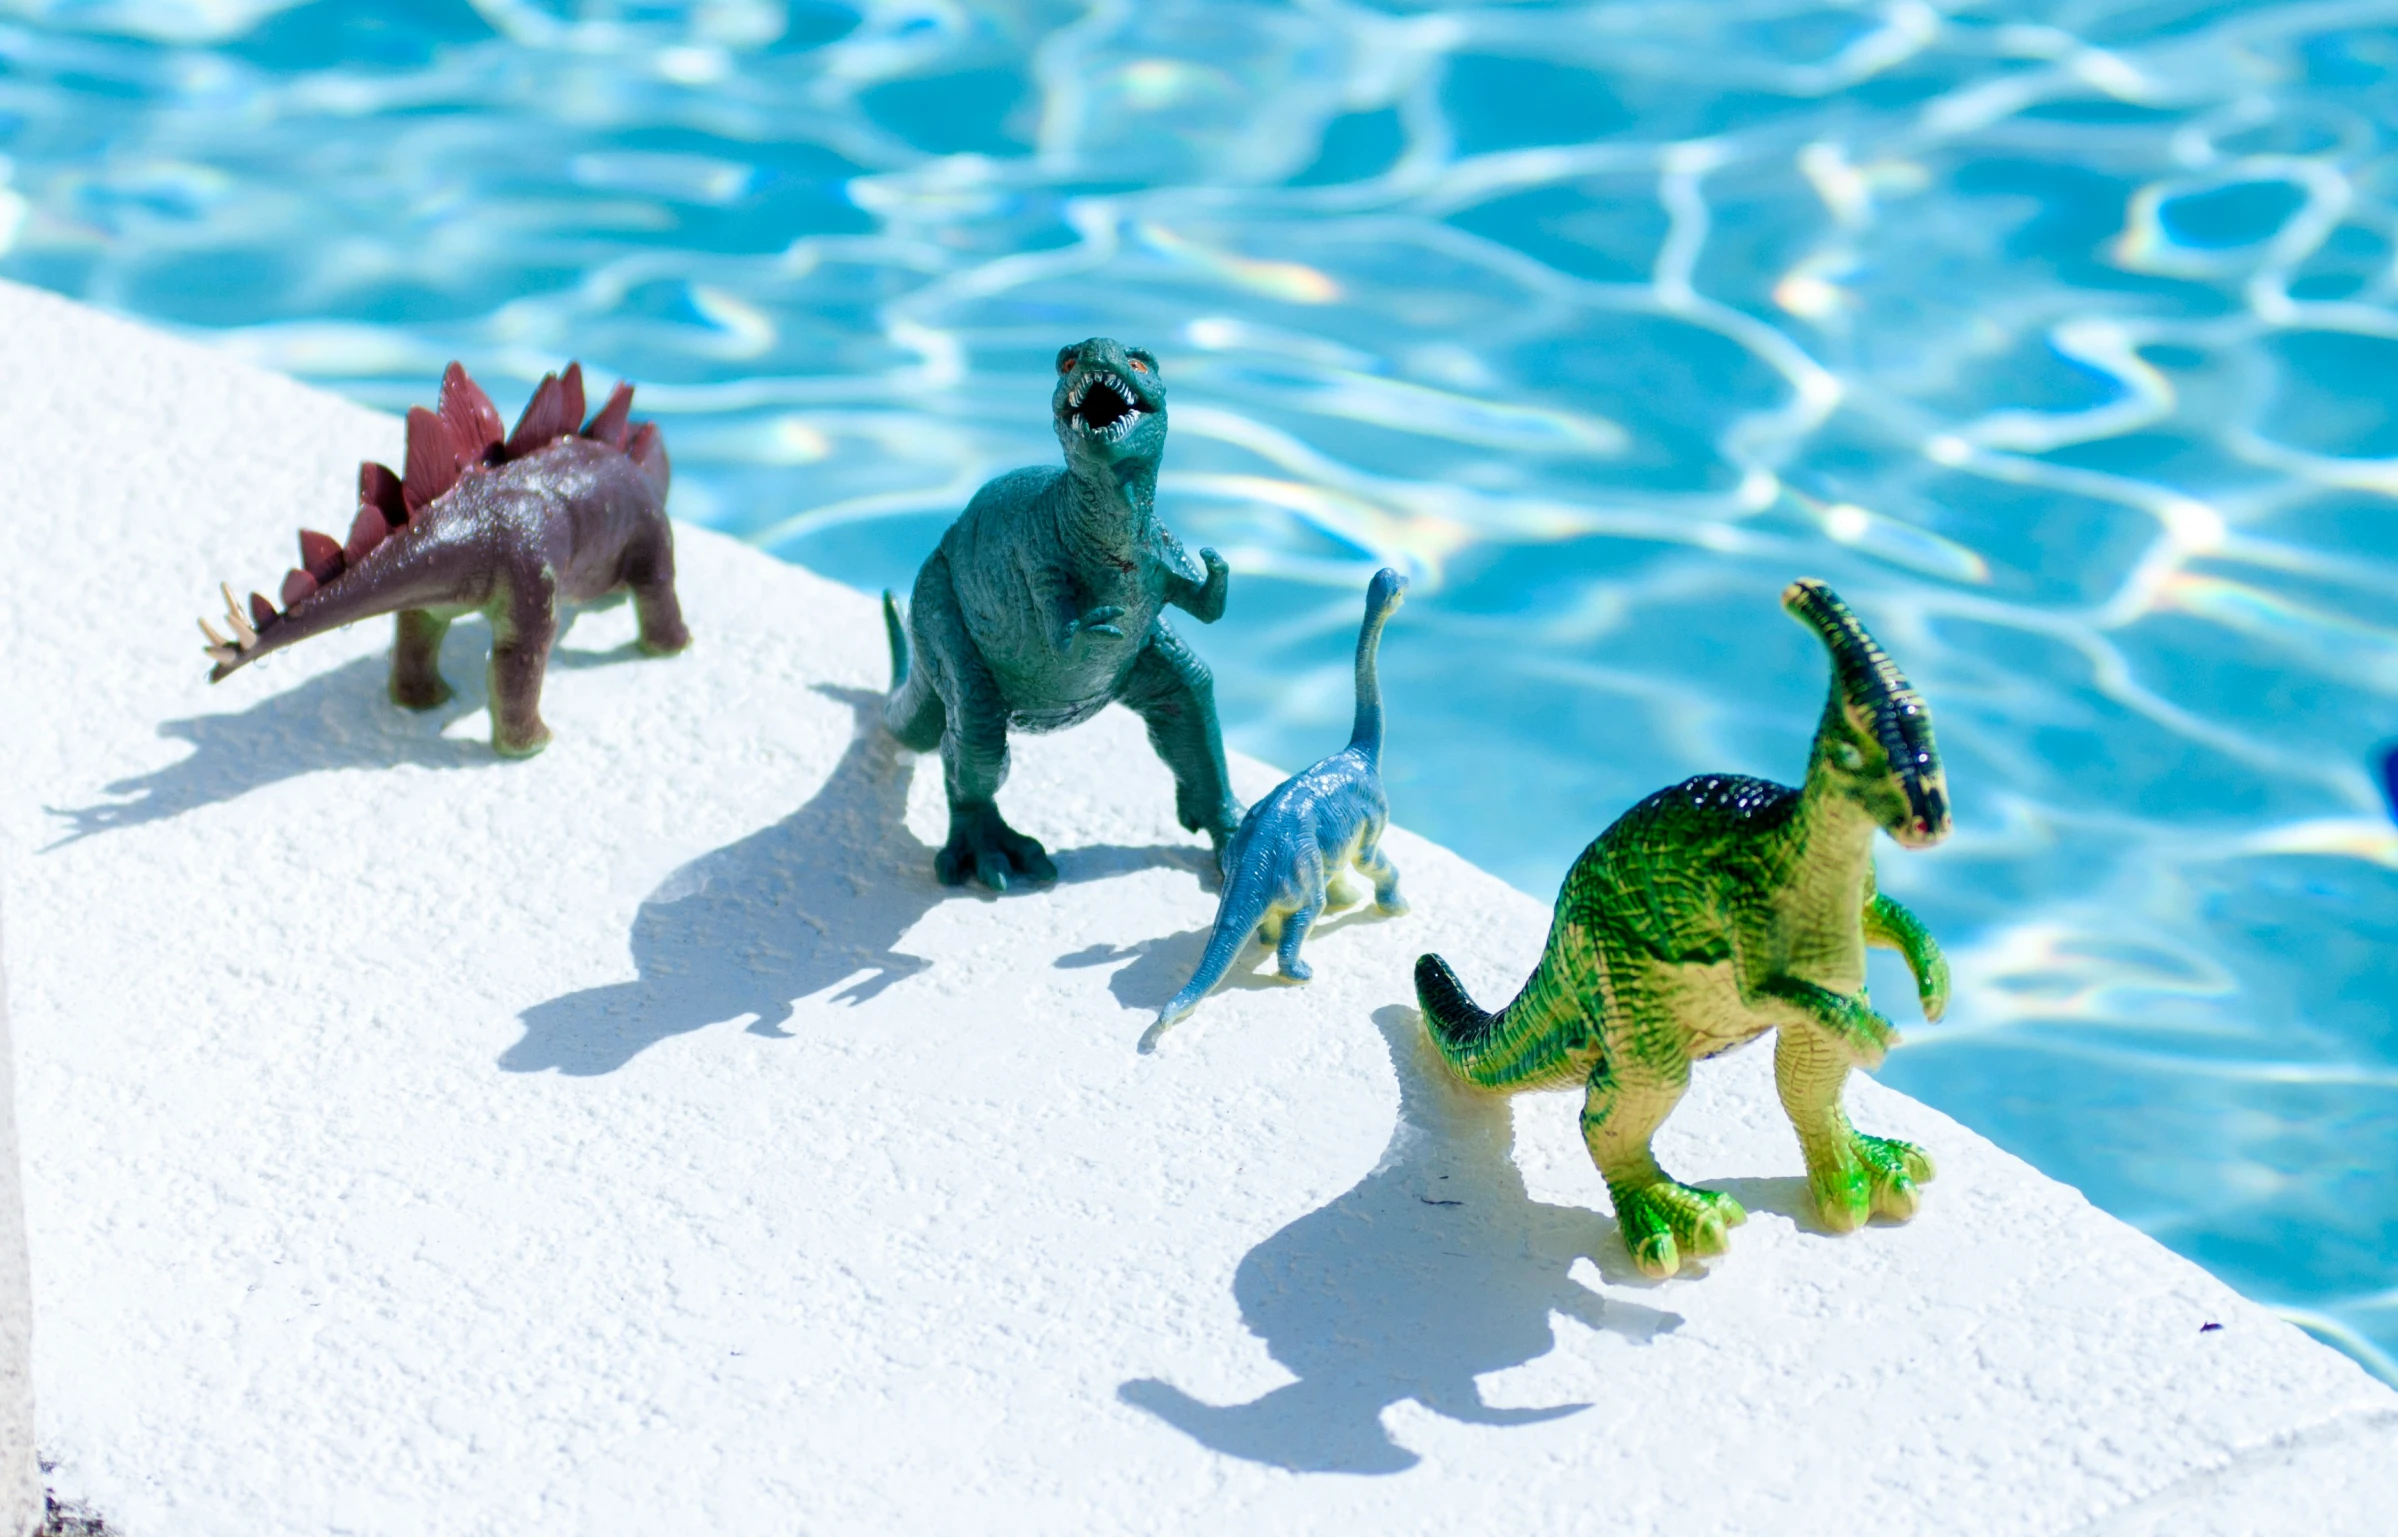 four dinosaur figurines are sitting in front of an icy pool